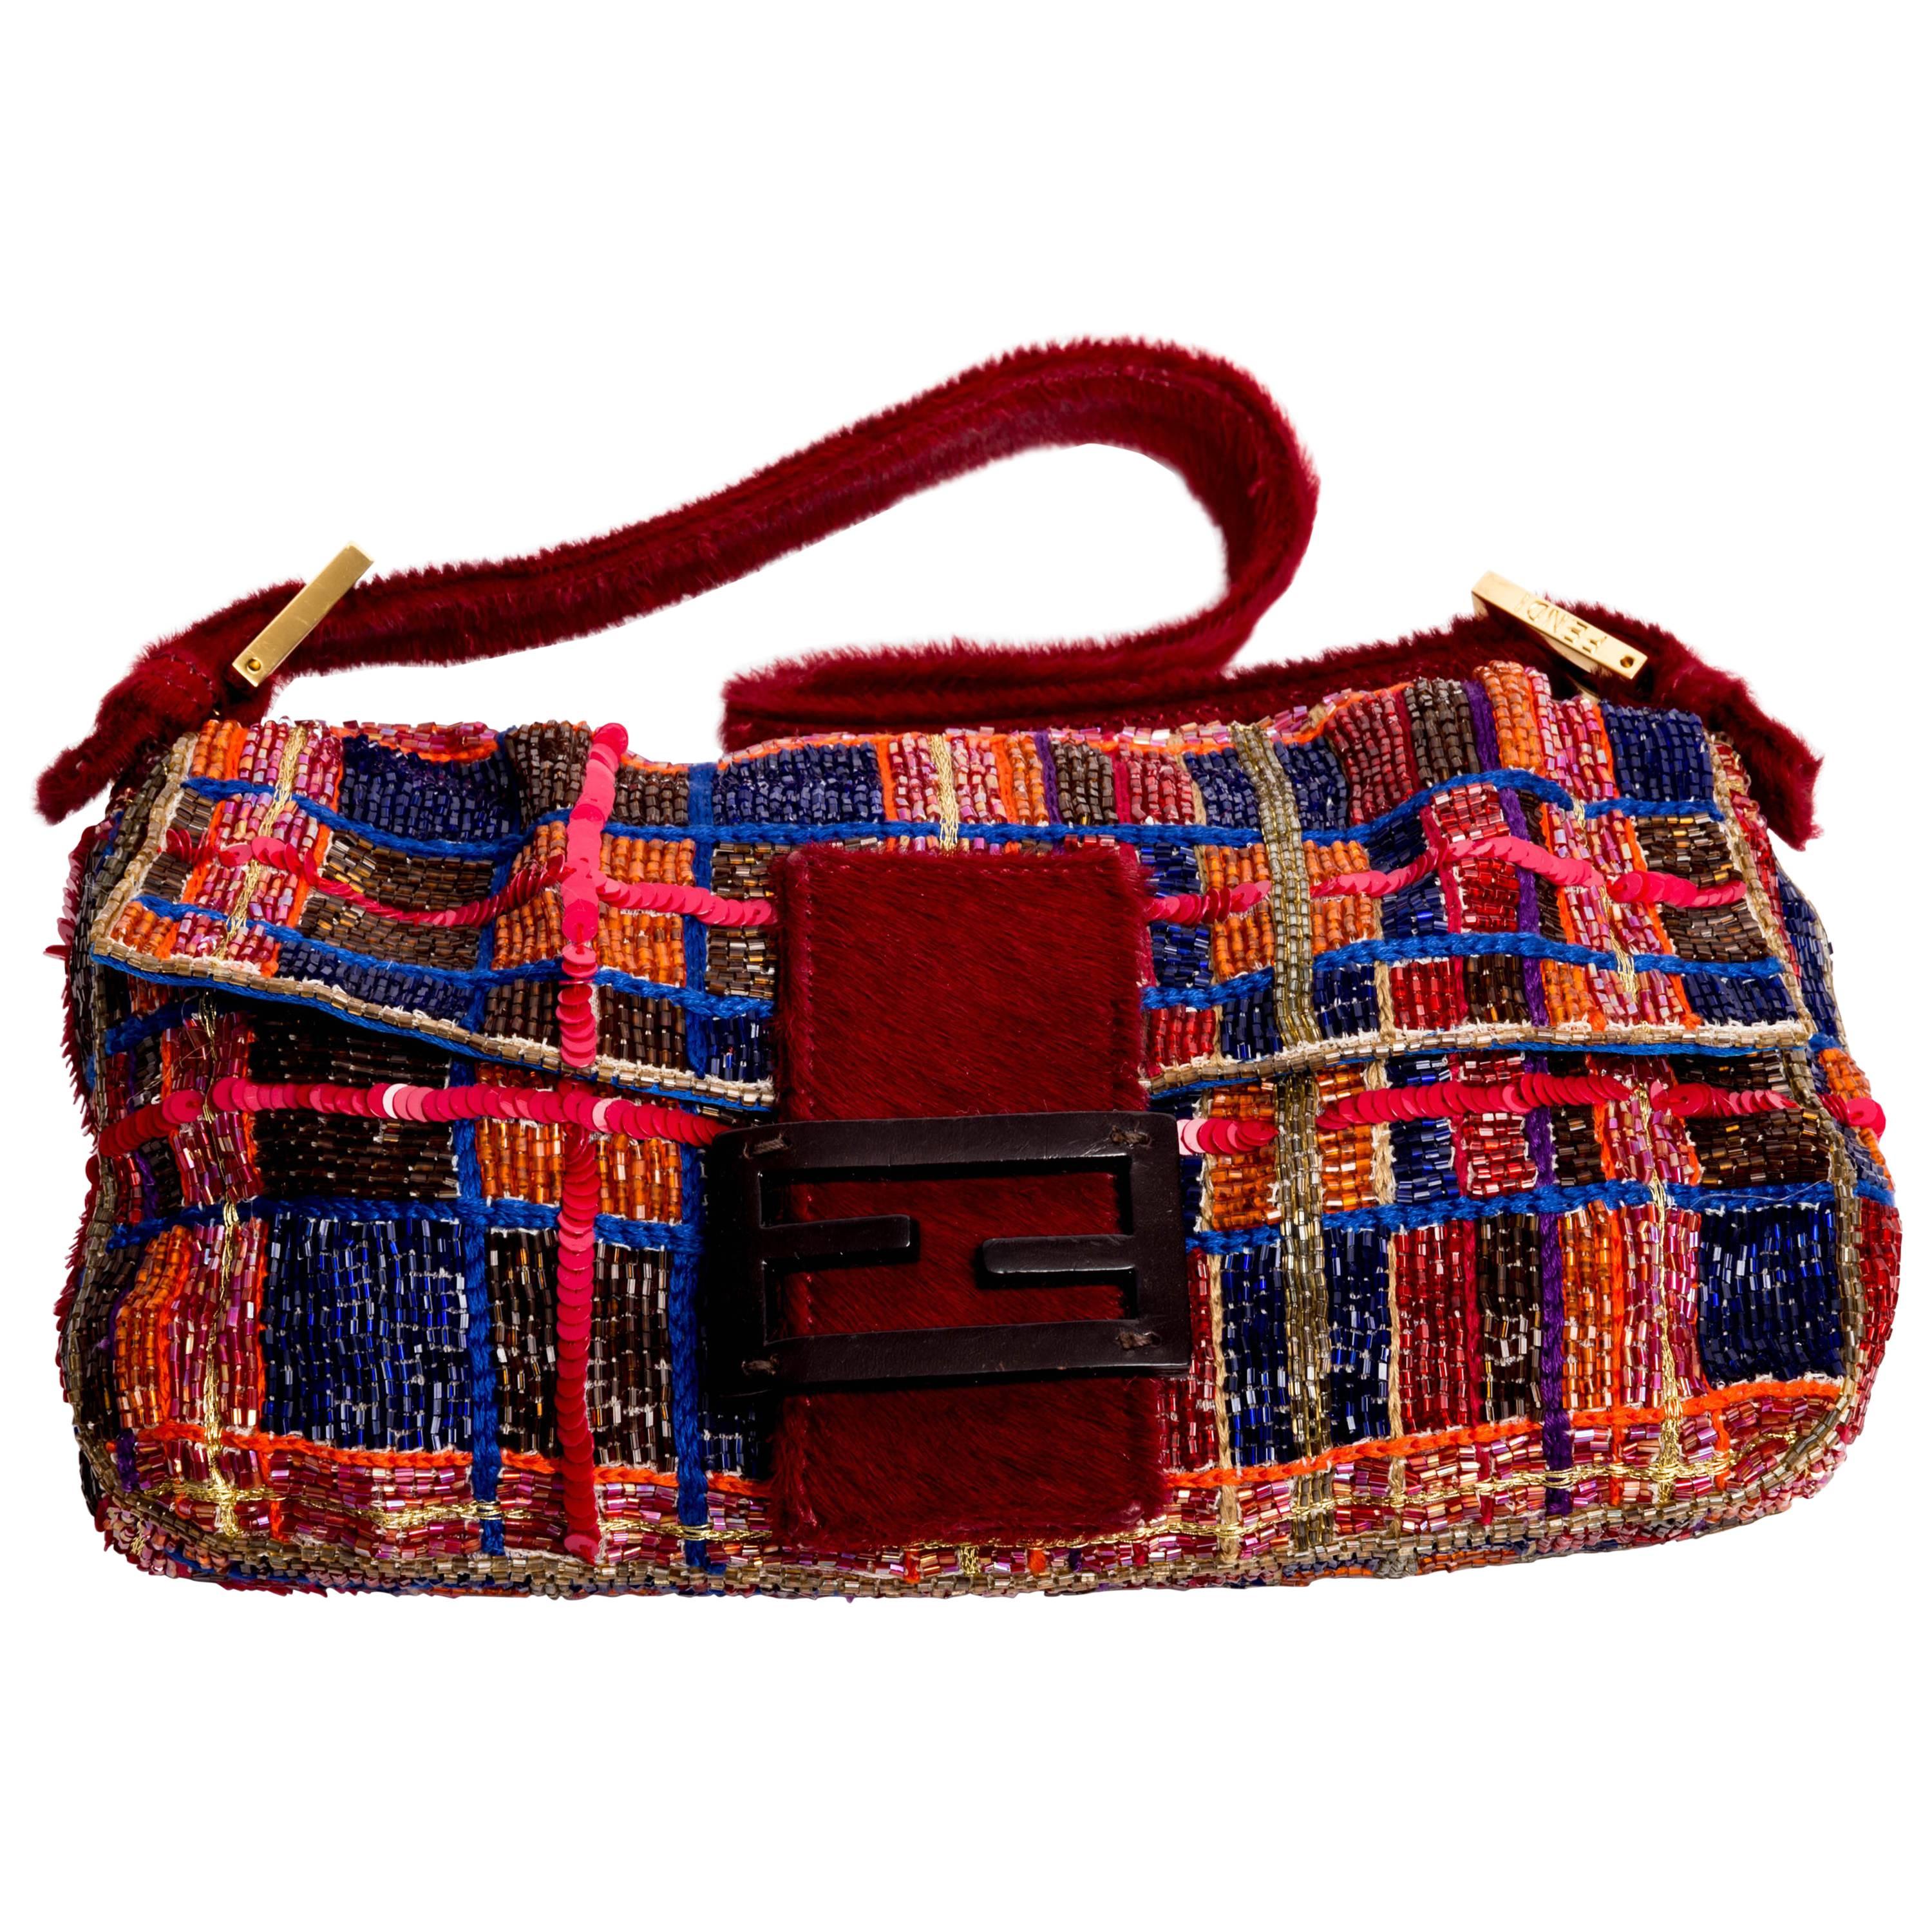 Fendi Red Checkered Bugle Bead and Sequin Baguette with Pony Skin Handle